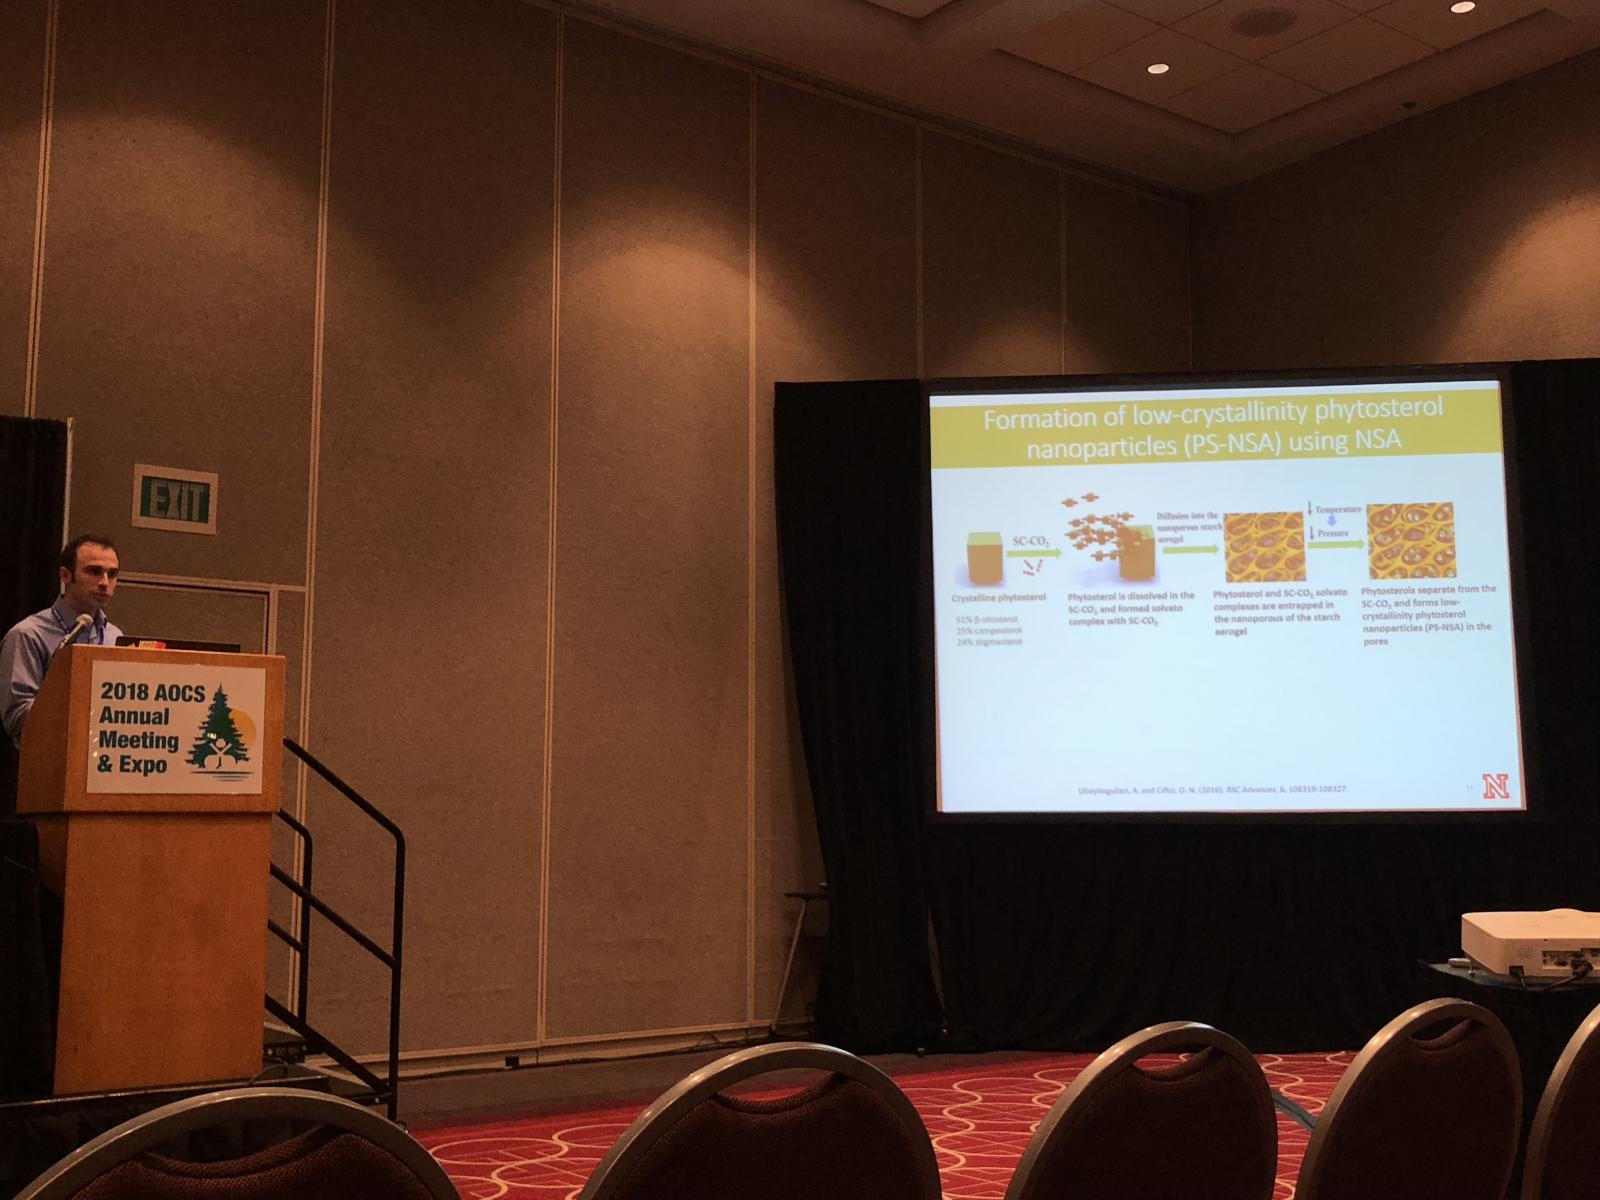 Ali presenting his project at the AOCS Annual Meeting and Expo in Minneapolis, MN